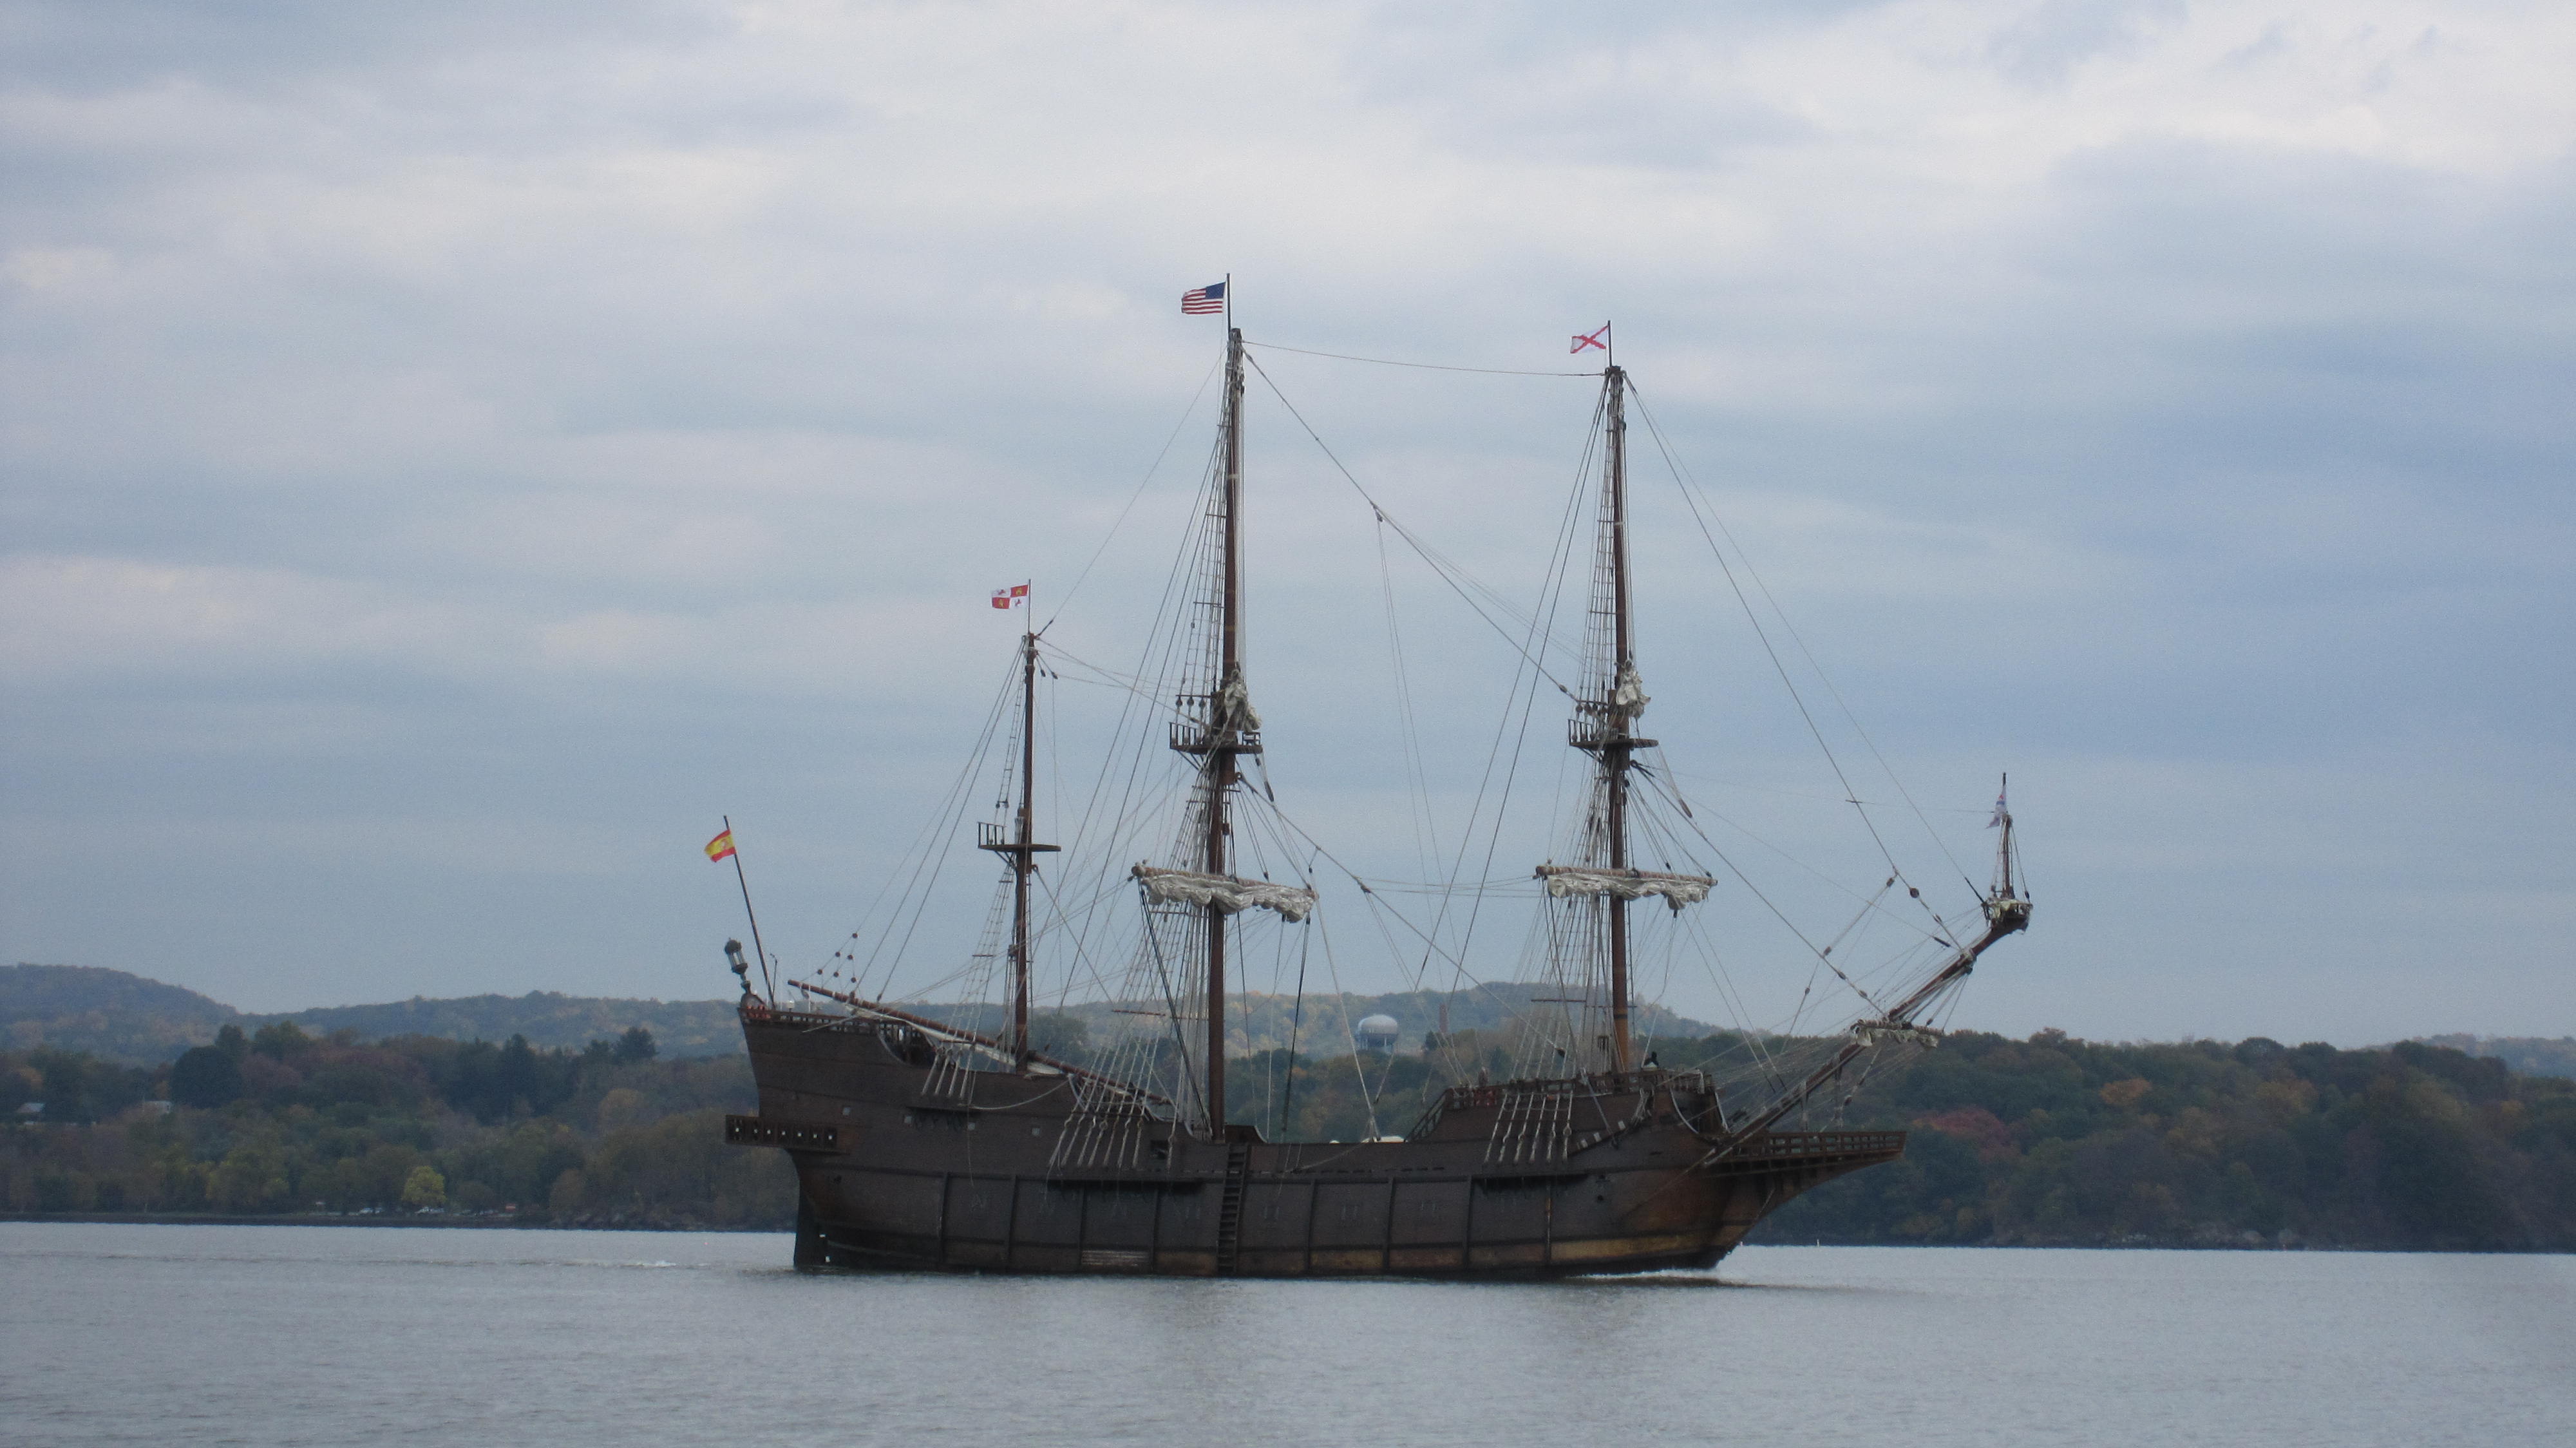 Pirate Ship on the Hudson